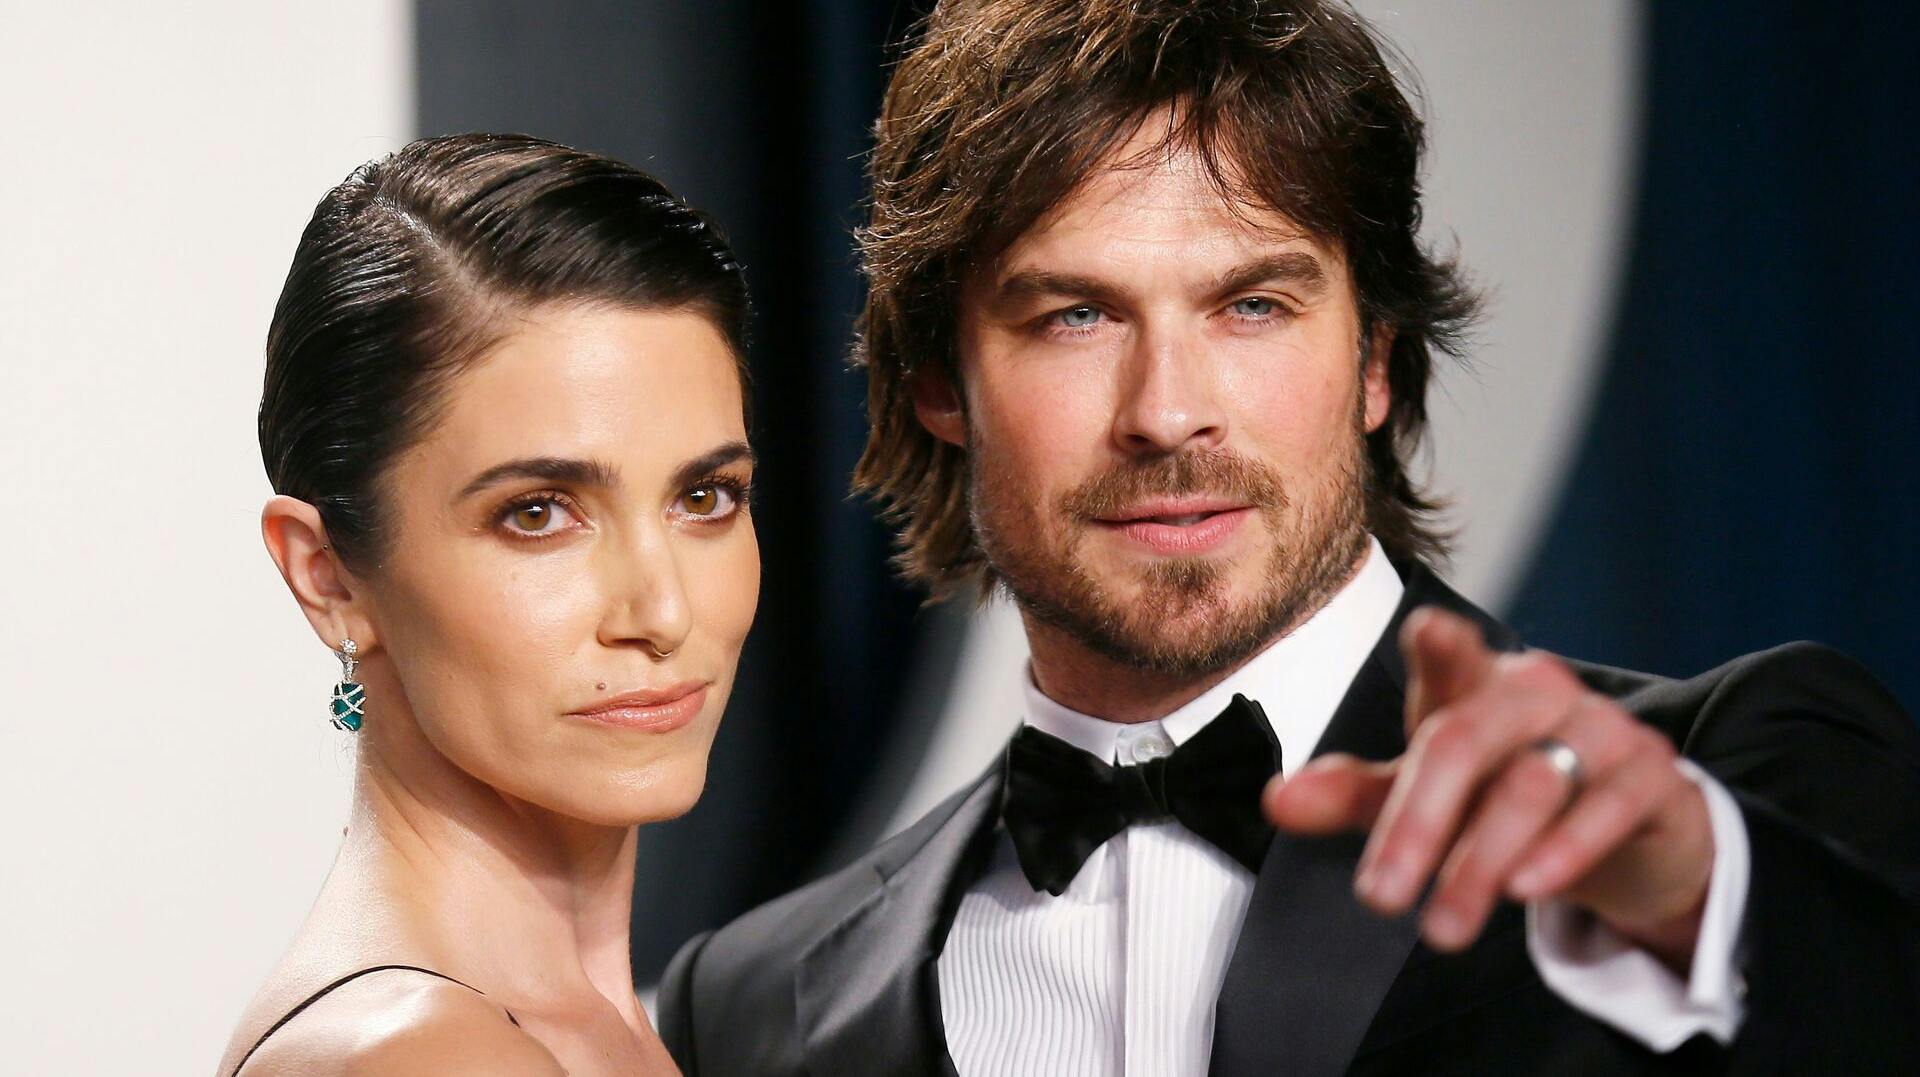 Nikki Reed and Ian Somerhalder attend the Vanity Fair Oscar party in Beverly Hills during the 92nd Academy Awards, in Los Angeles, California, U.S., February 9, 2020. REUTERS/Danny Moloshok